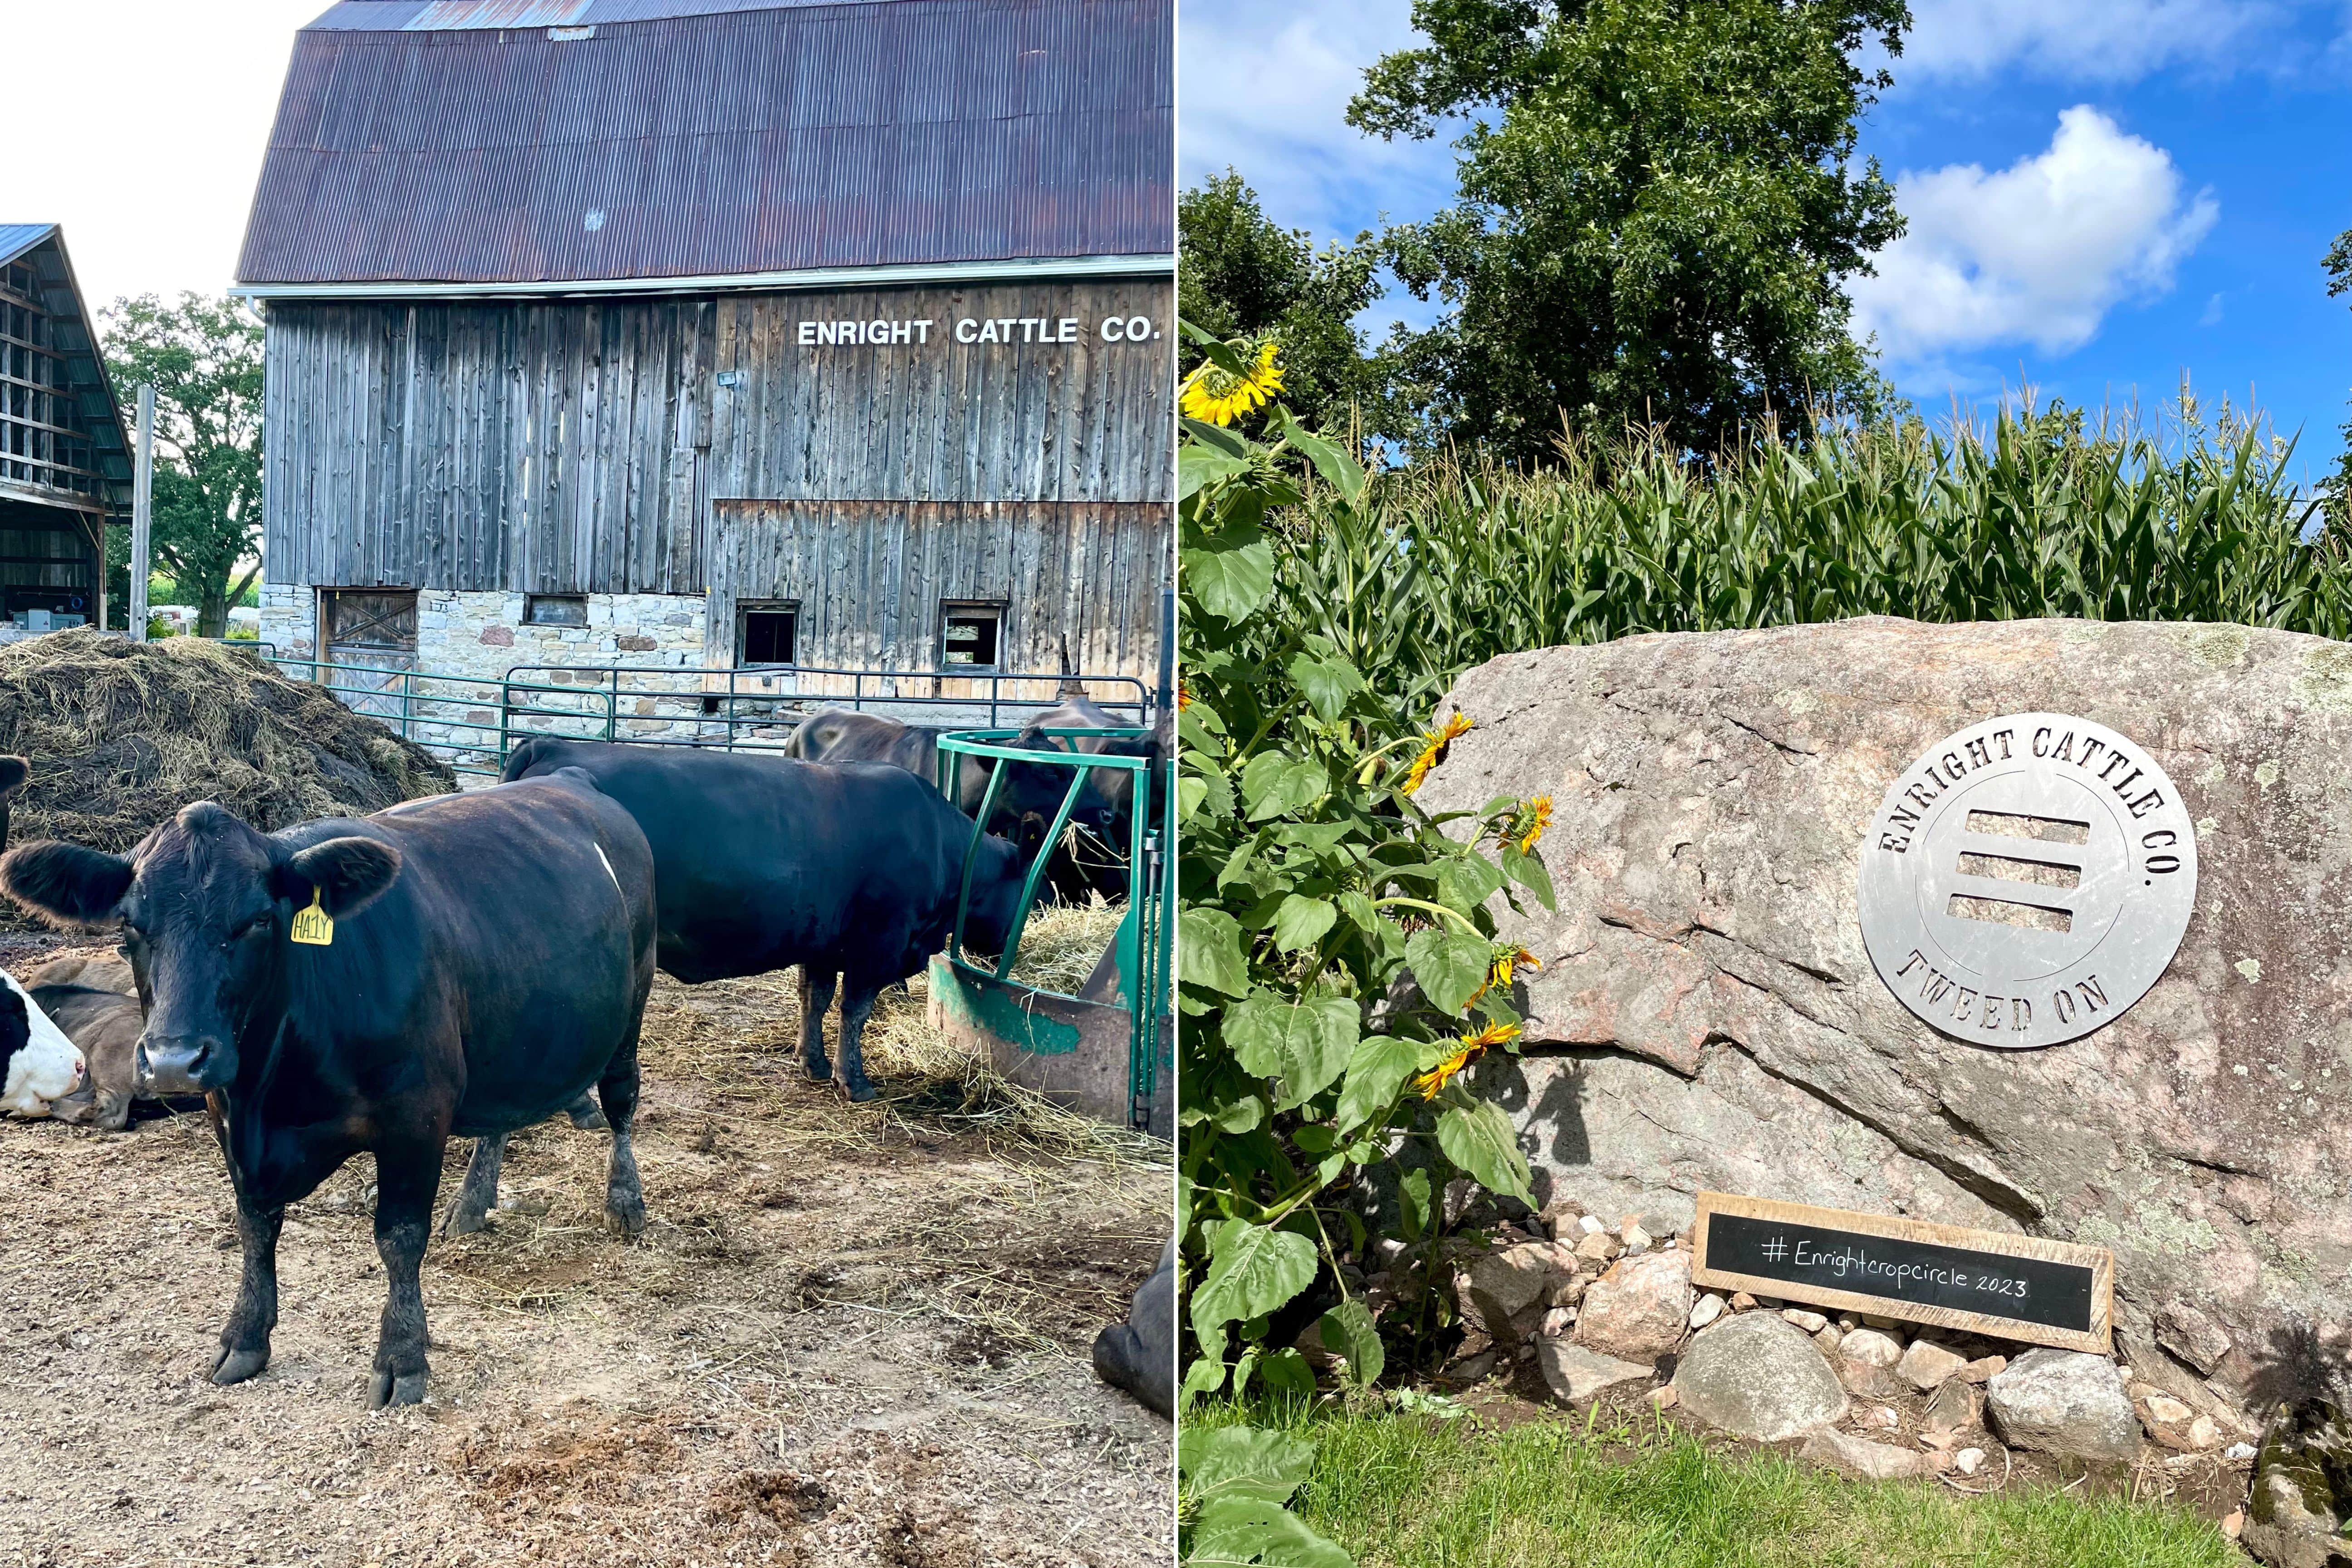 Two side by side images of black coloured cattle with barn in the background and rock facade with Enright Cattle Company branding.